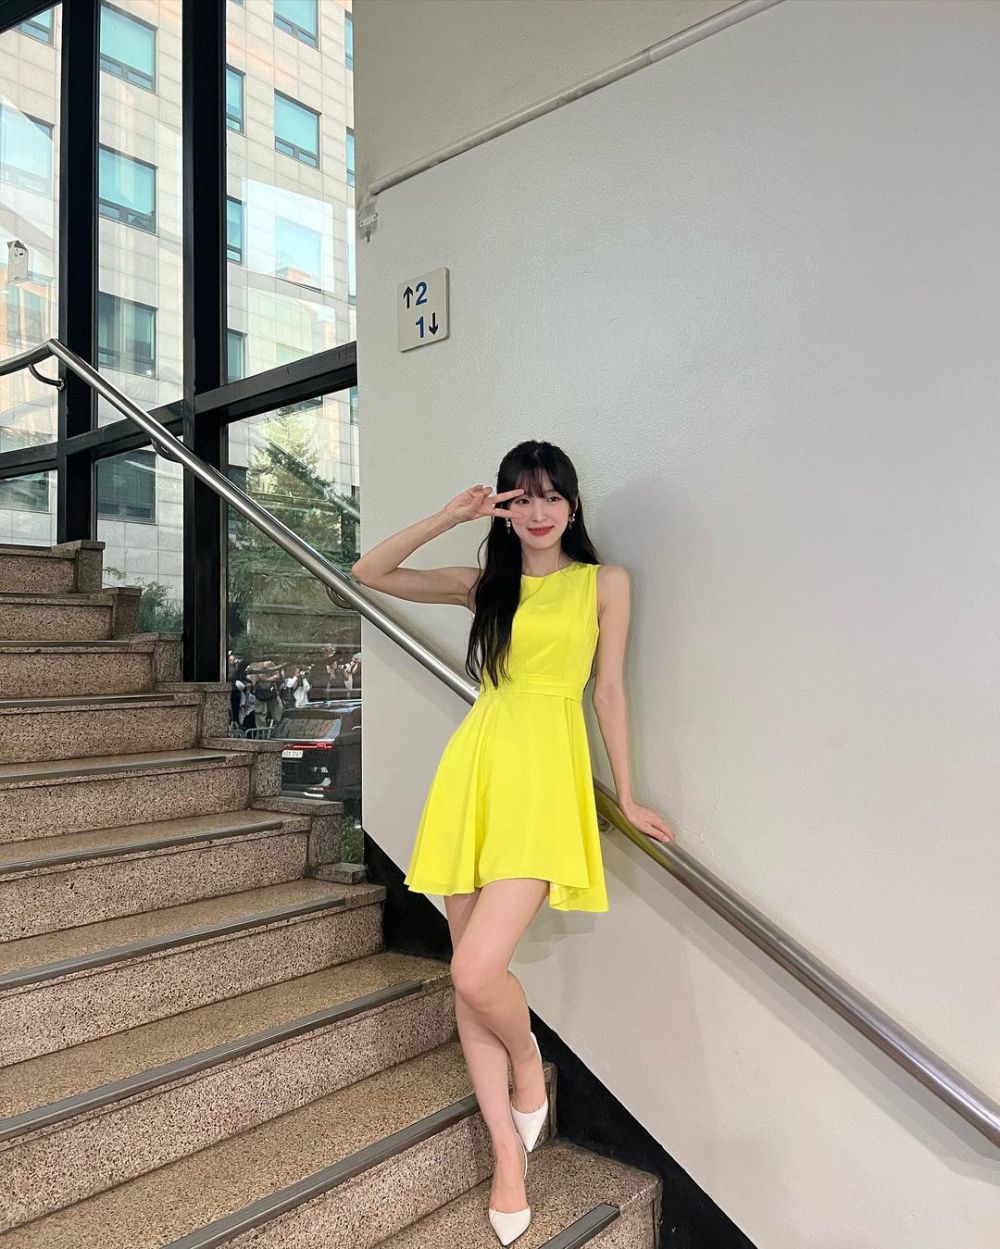 10 Ide Outfit Girly ala Arin Oh My Girl, Tampil Fresh dan Cute!